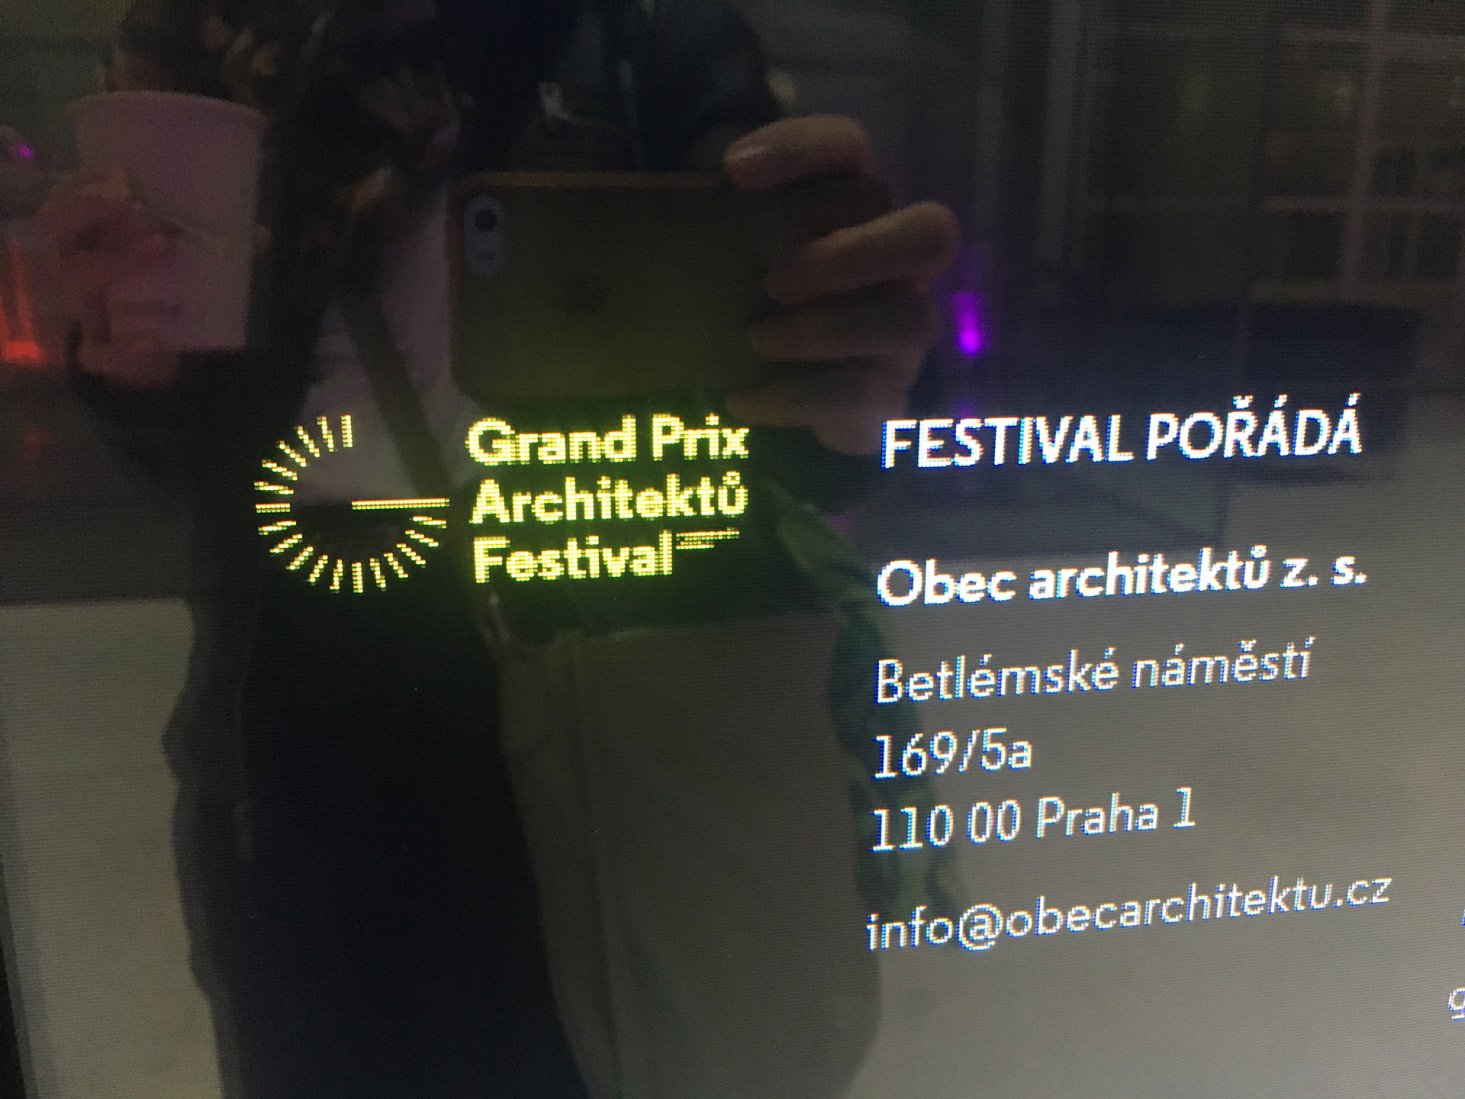 The Grand Prix Architecture Awards Today